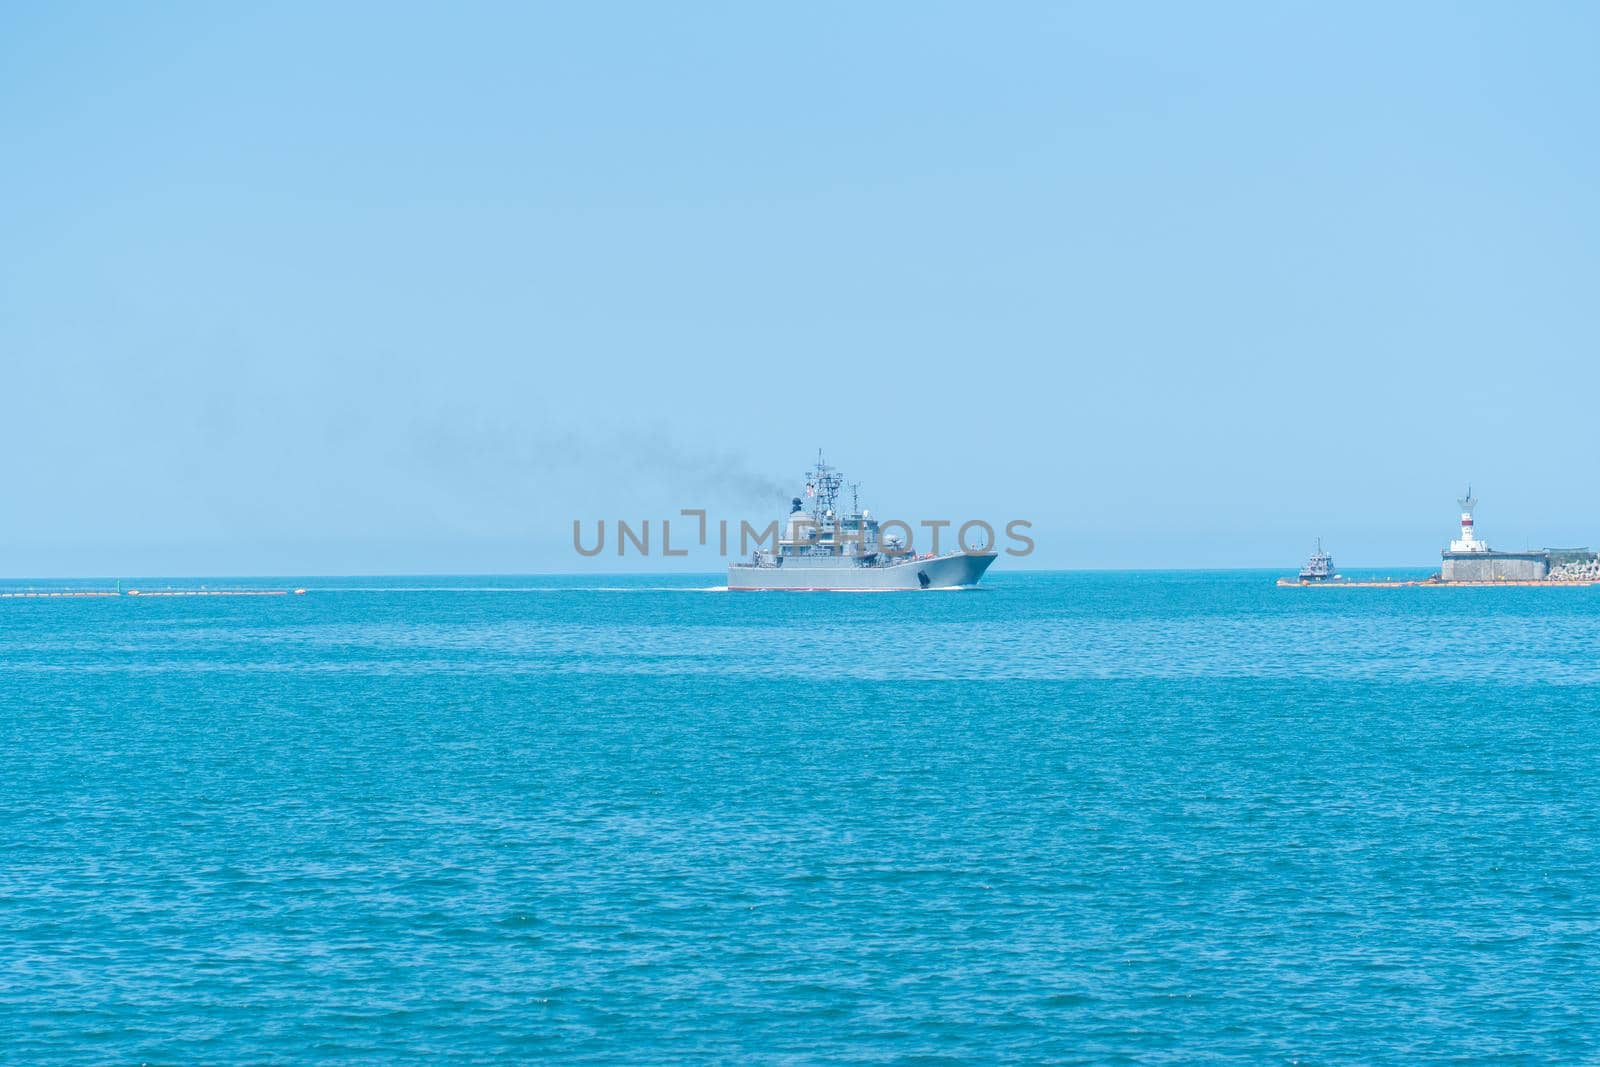 RUSSIA, CRIMEA - JUL 08, 2022: Russian navy military sevastopol russia group day sky sailing sea, concept black ship in warship for port force, weapon defense. Destroyer steel missile, by 89167702191